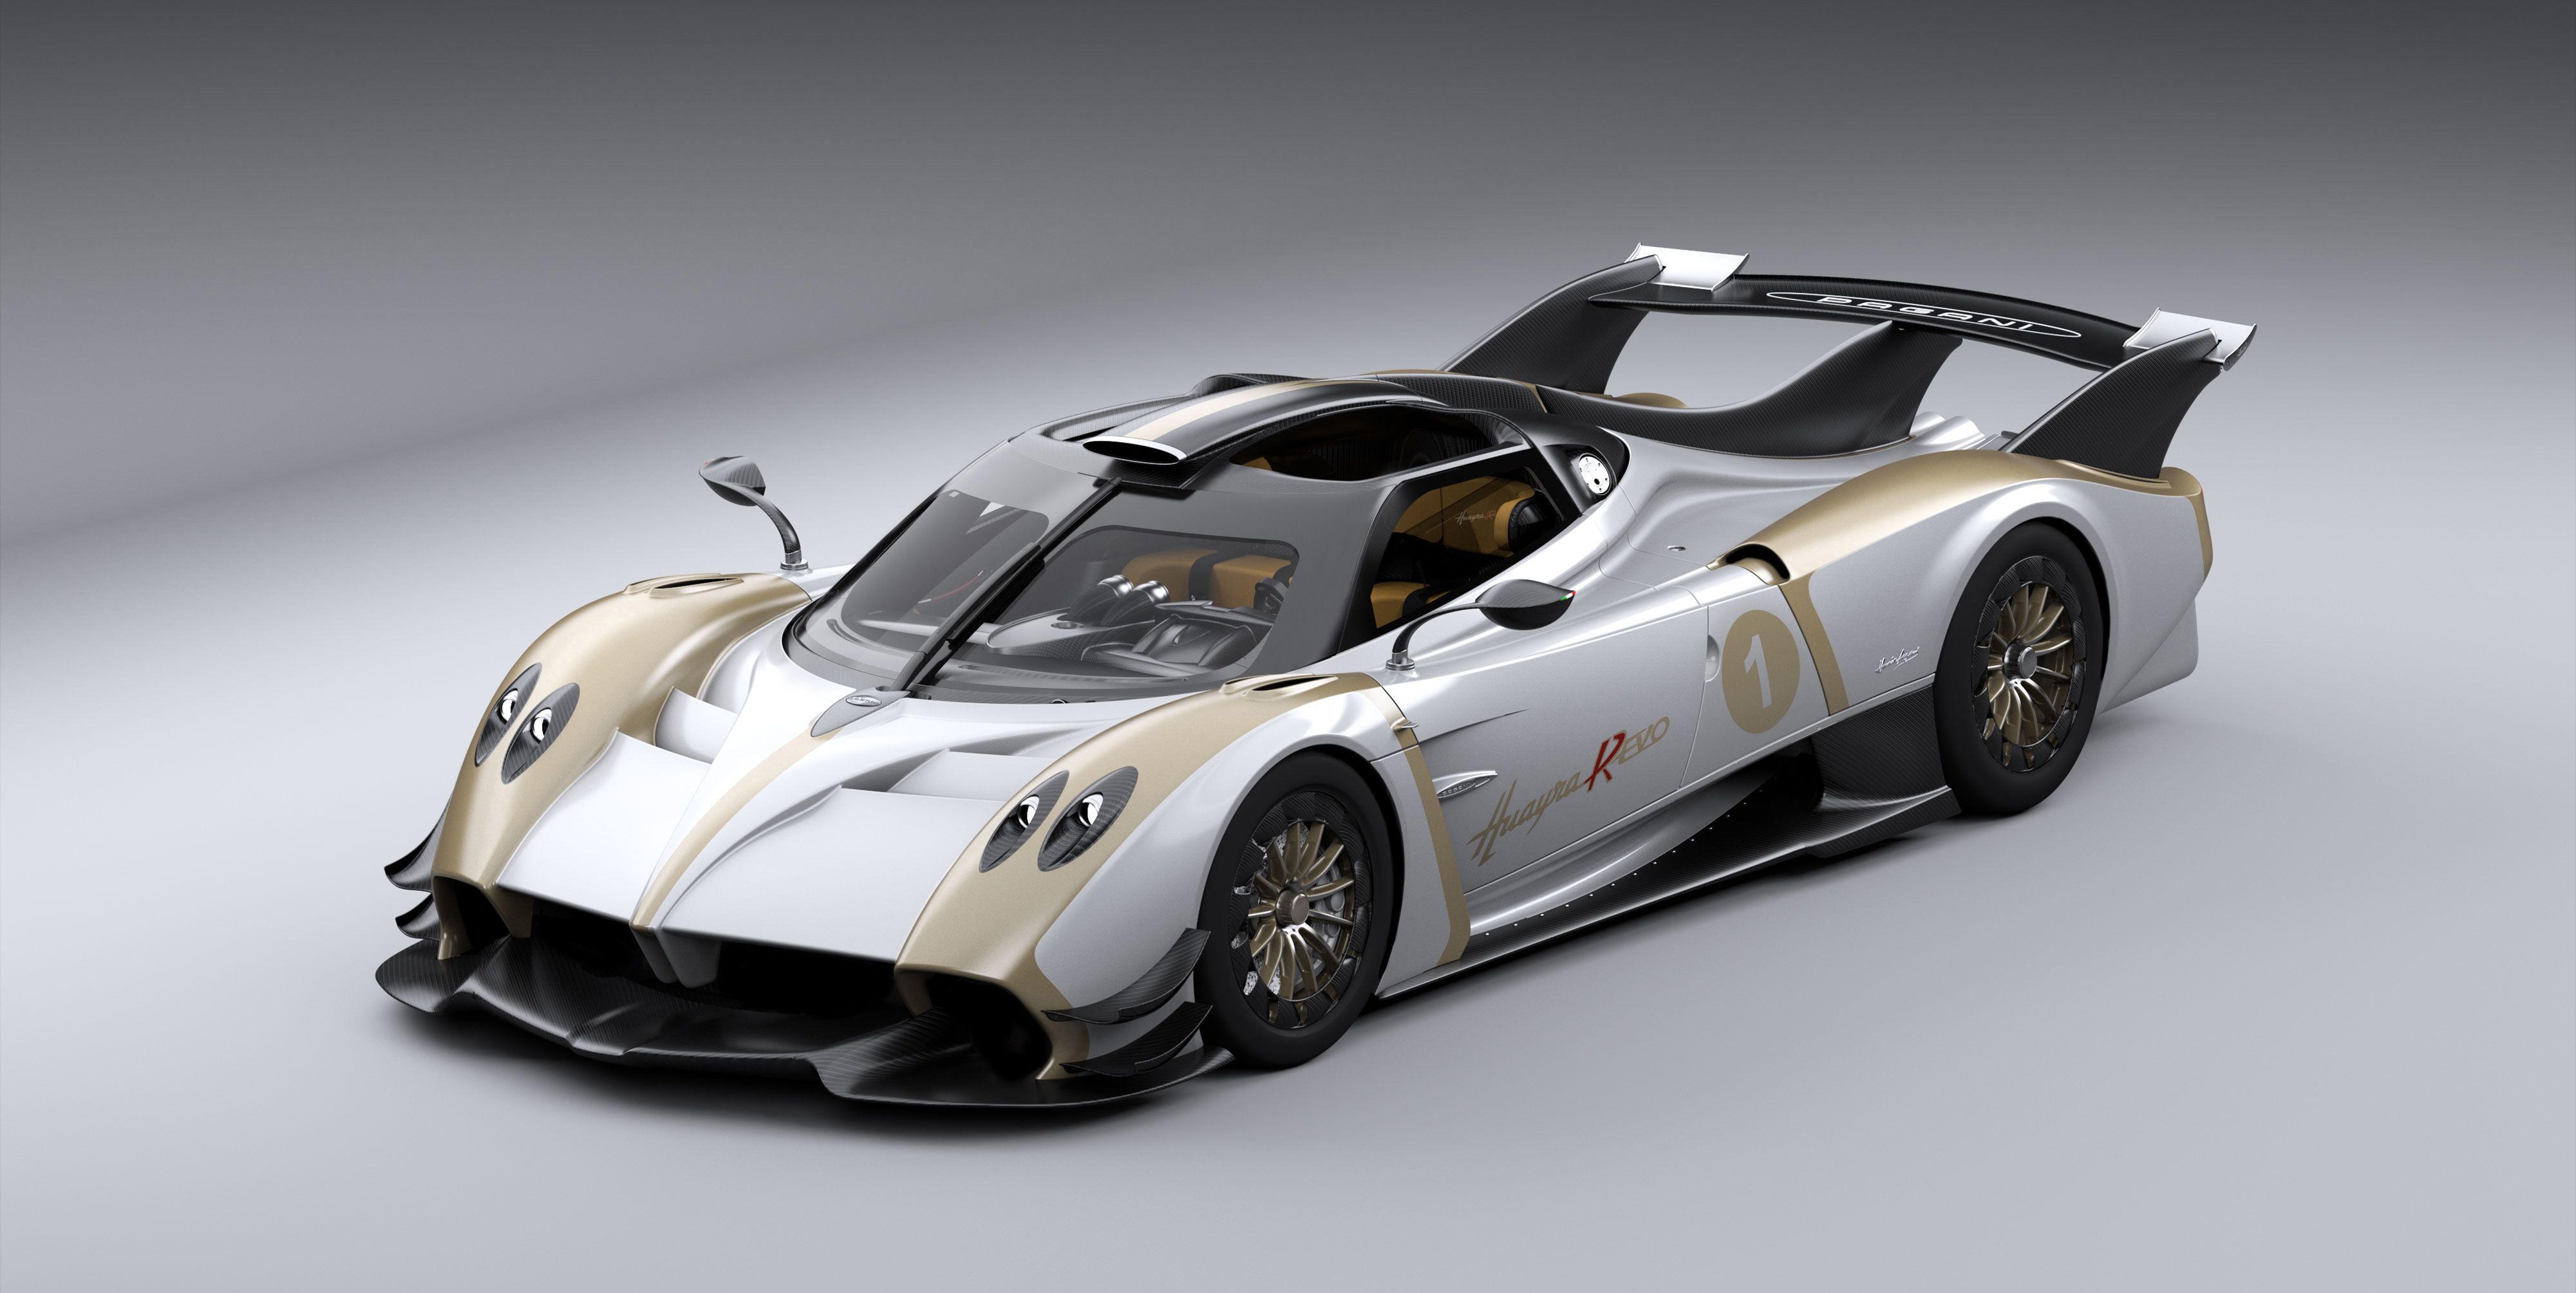 The Pagani Huayra R Evo Is a Long-Tailed Track Monster With 900 HP